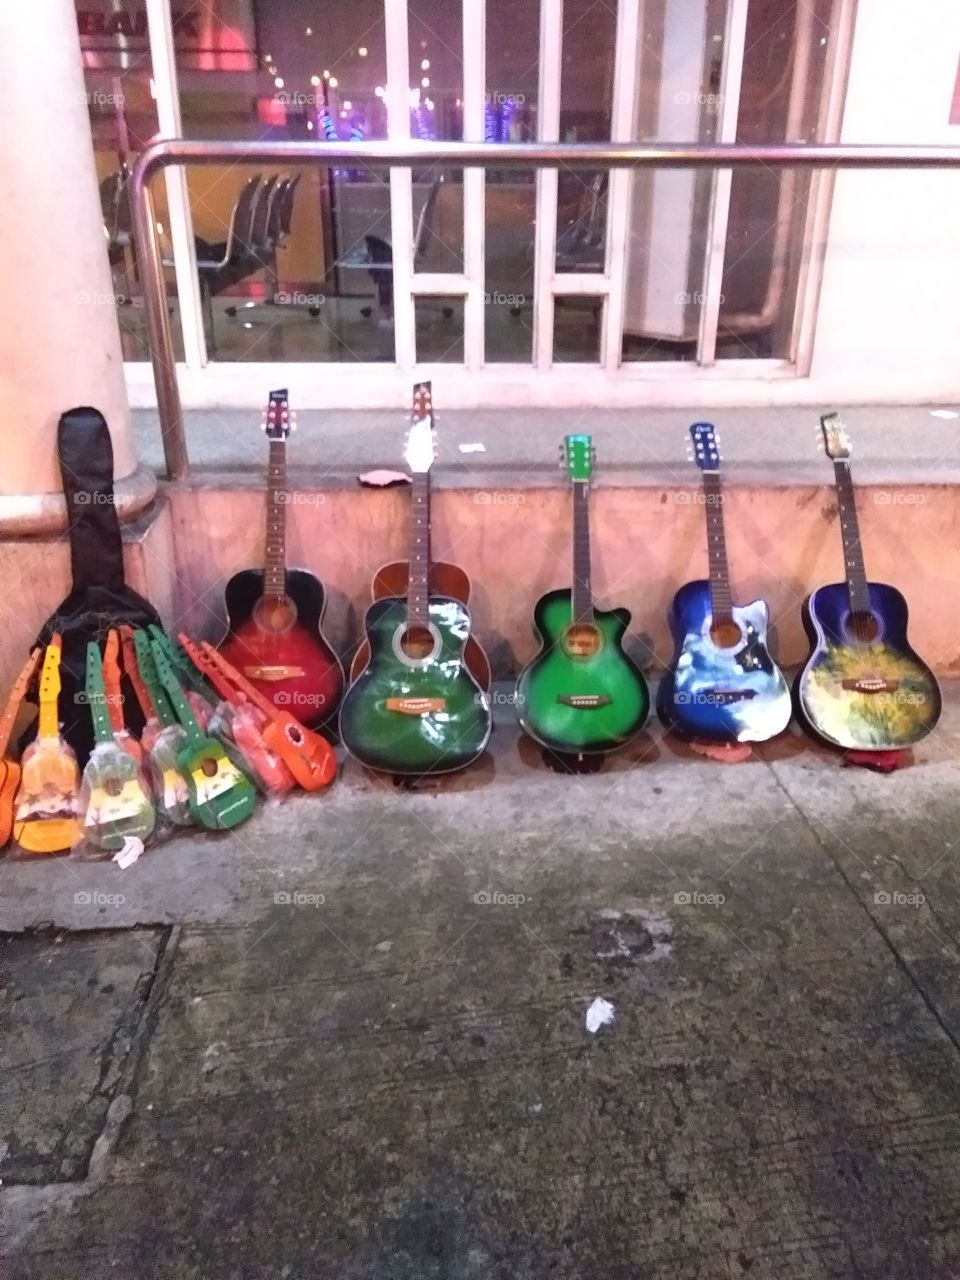 guitar's for sell in manila